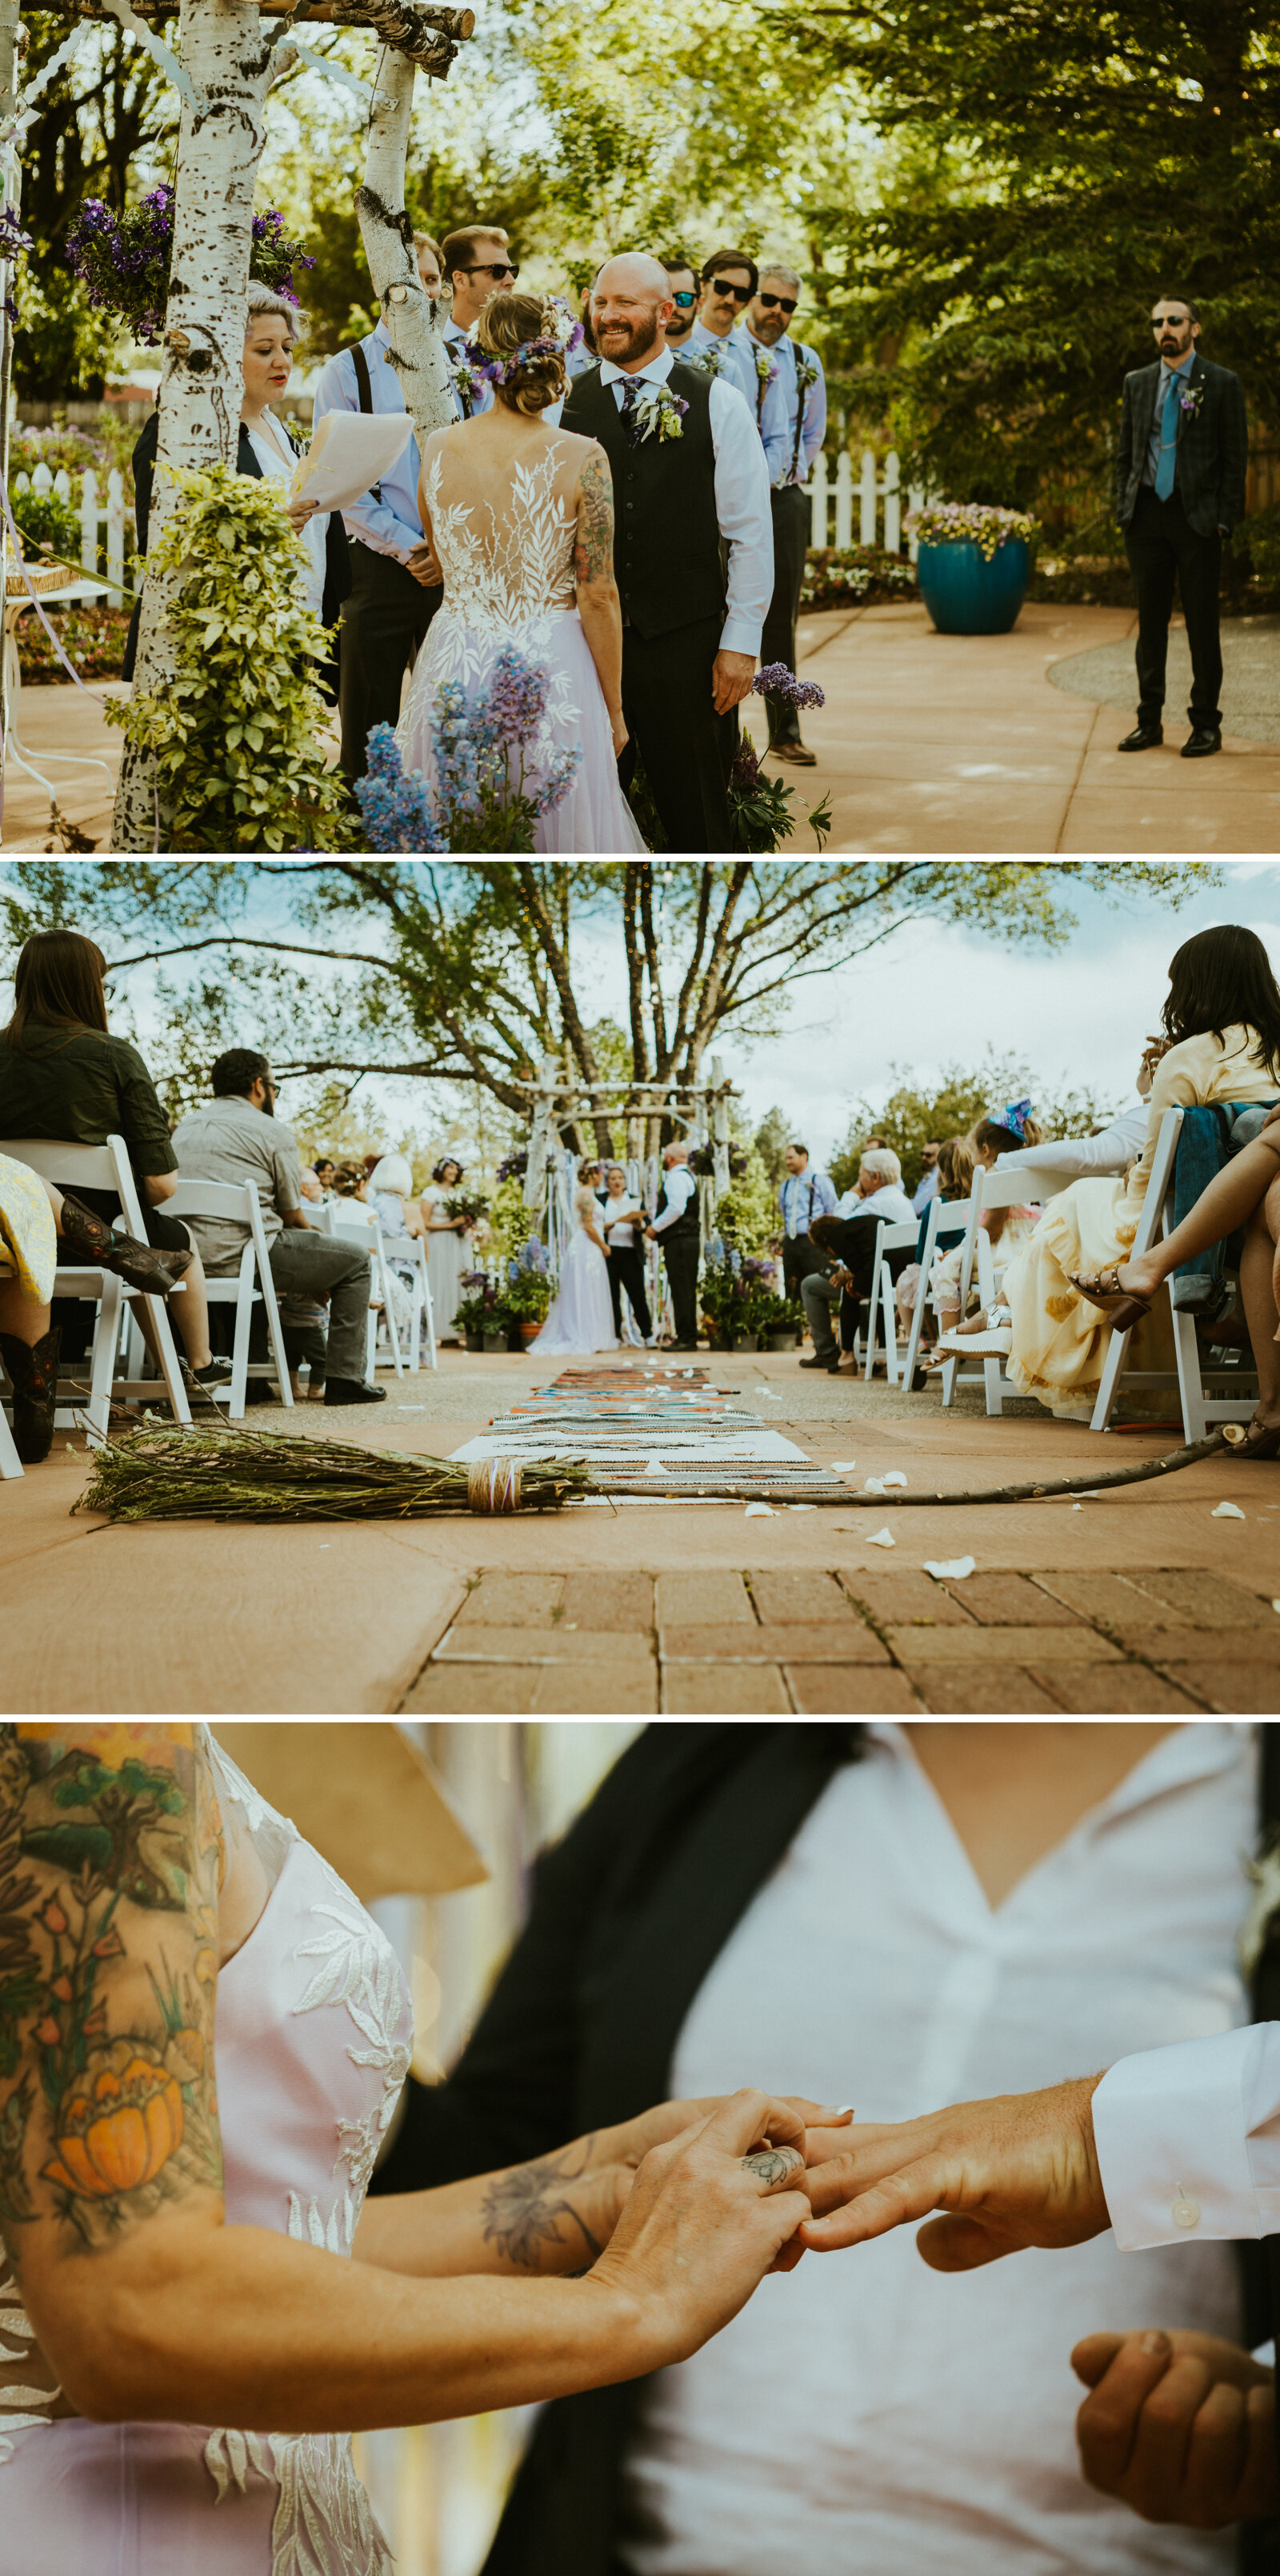 A wedding ceremony in flagstaff arizona at violas flower garden in june featuring a broom at the end of the aisle .jpg